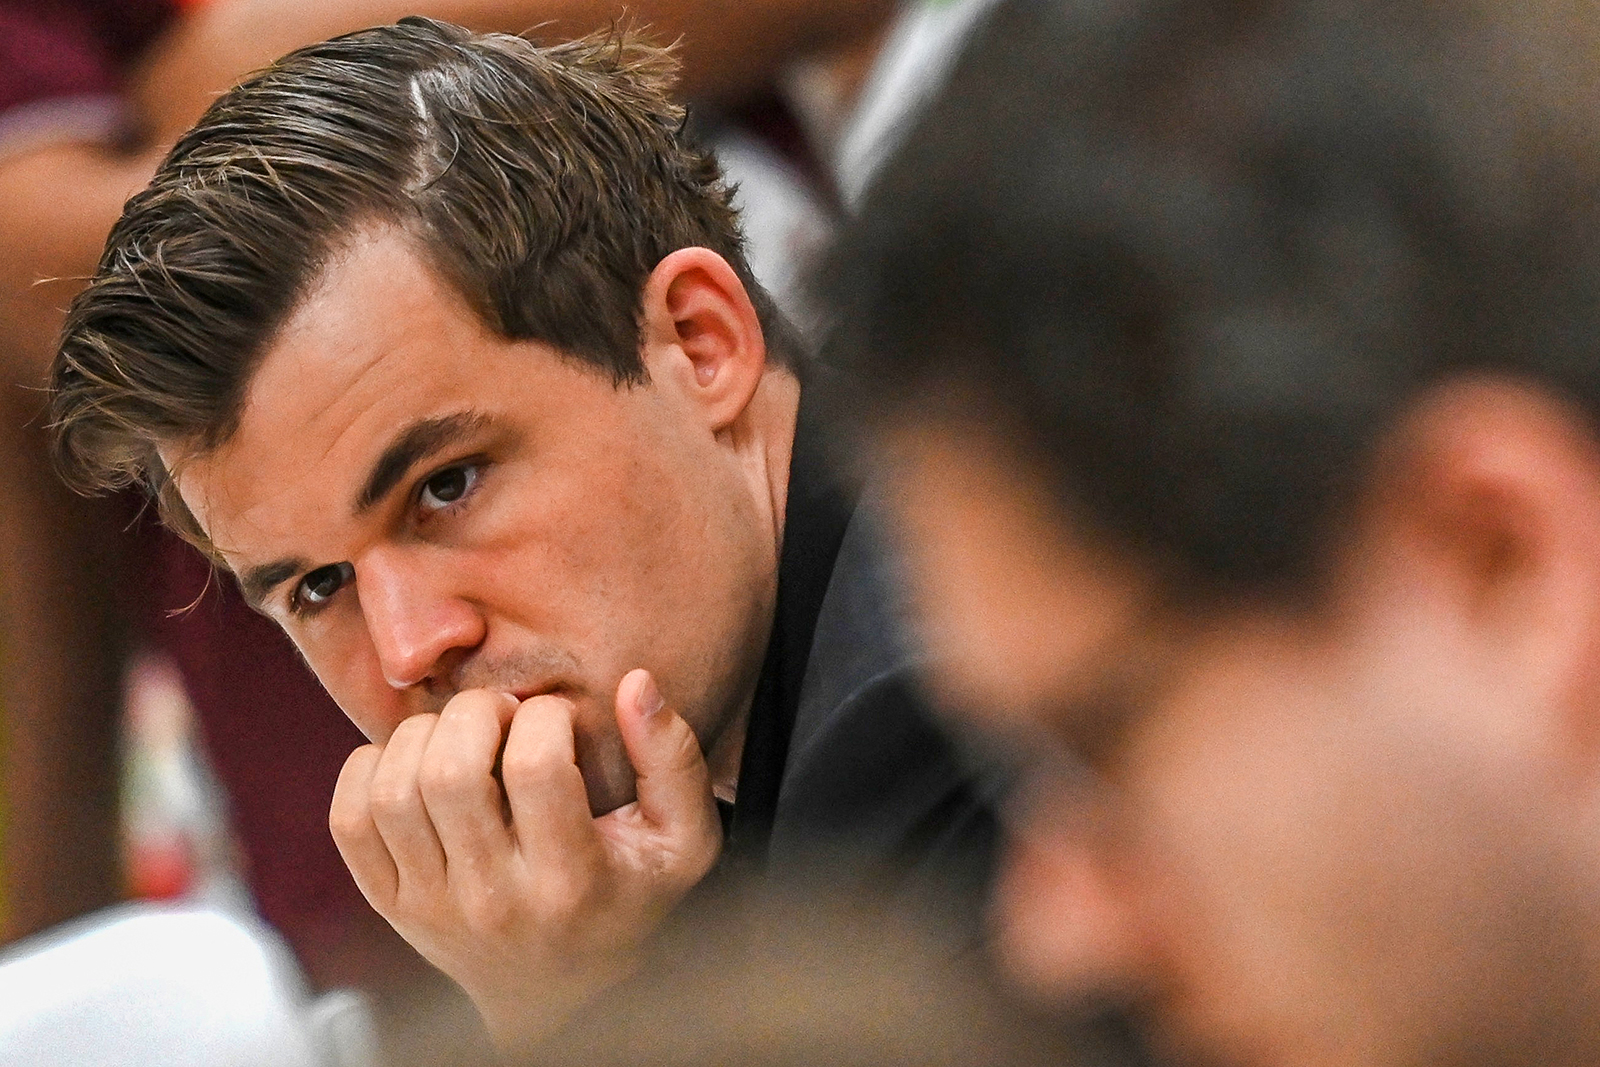 Quality Chess Blog » Carlsen disappointed